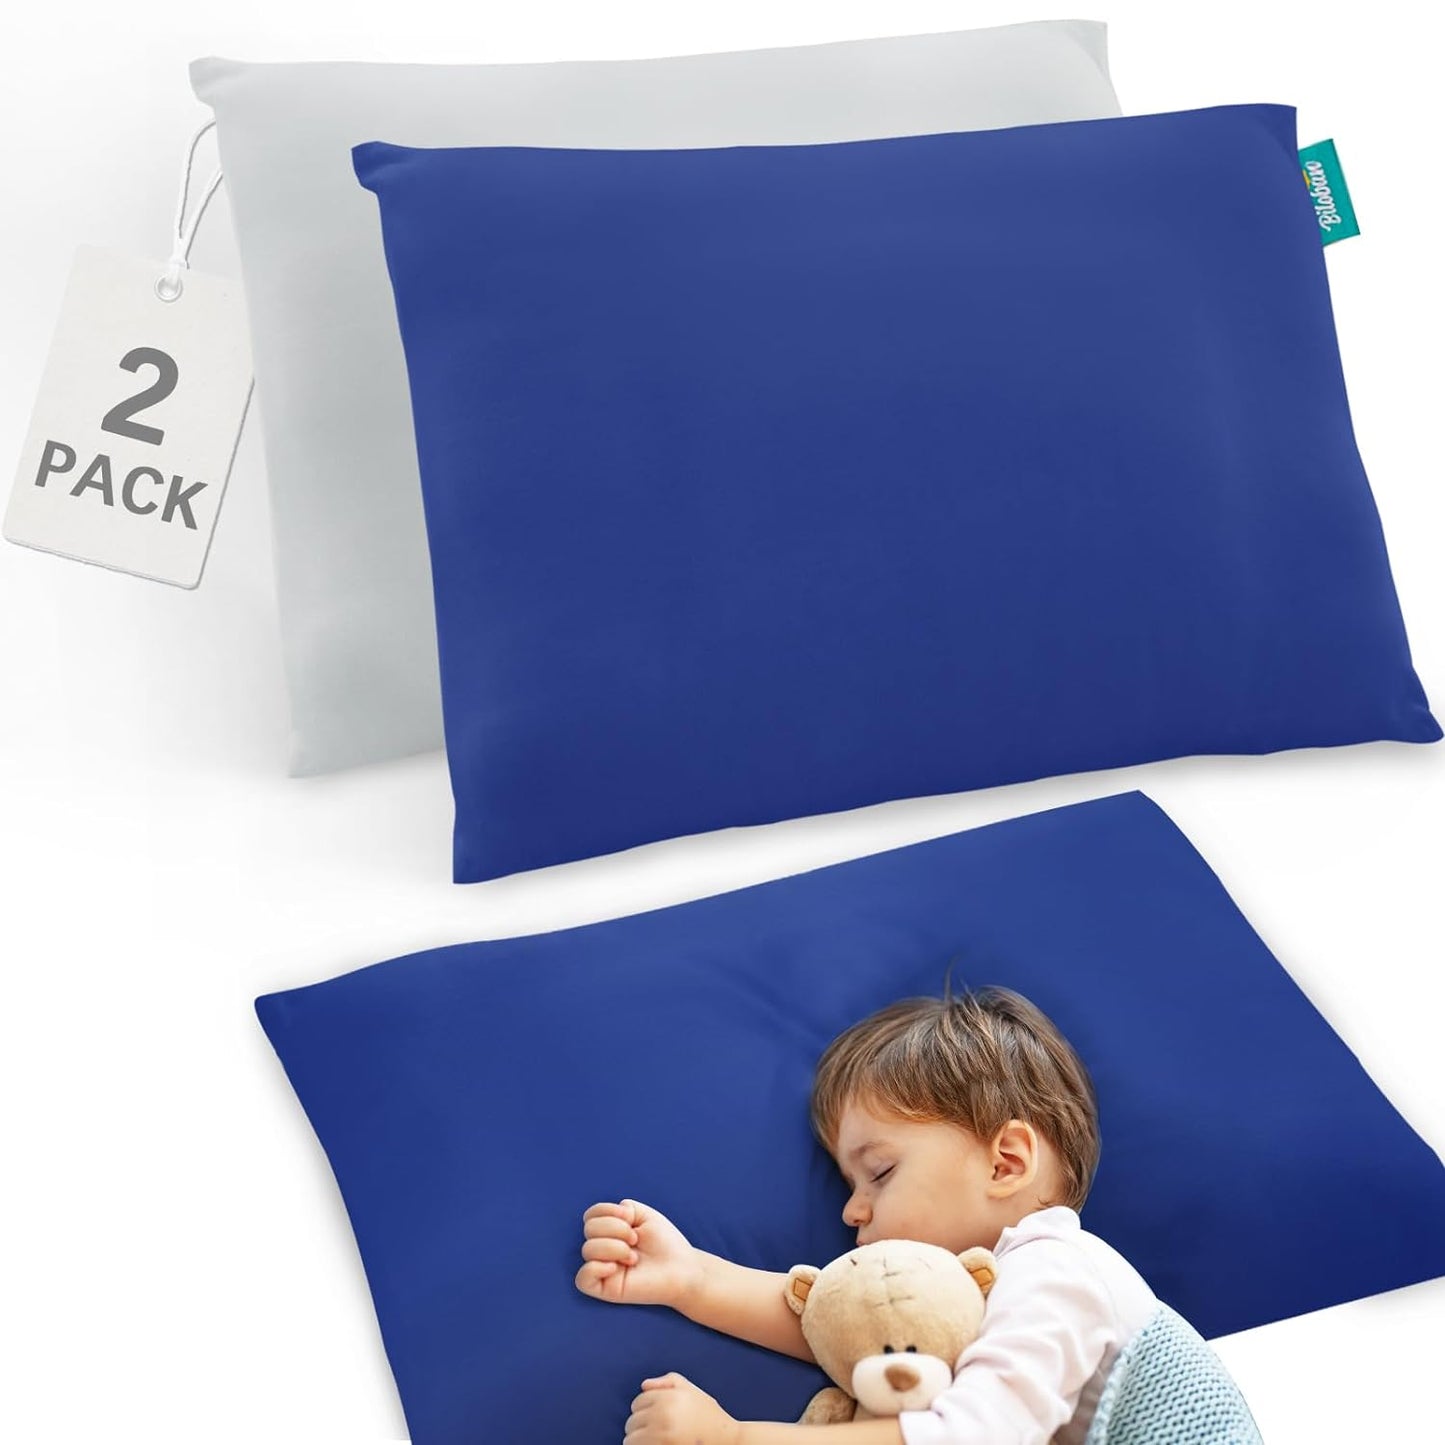 Toddler Pillow Quilted with Pillowcase - 2 Pack, 13" x 18", 100% Cotton, Ultra Soft & Breathable, Grey & Navy